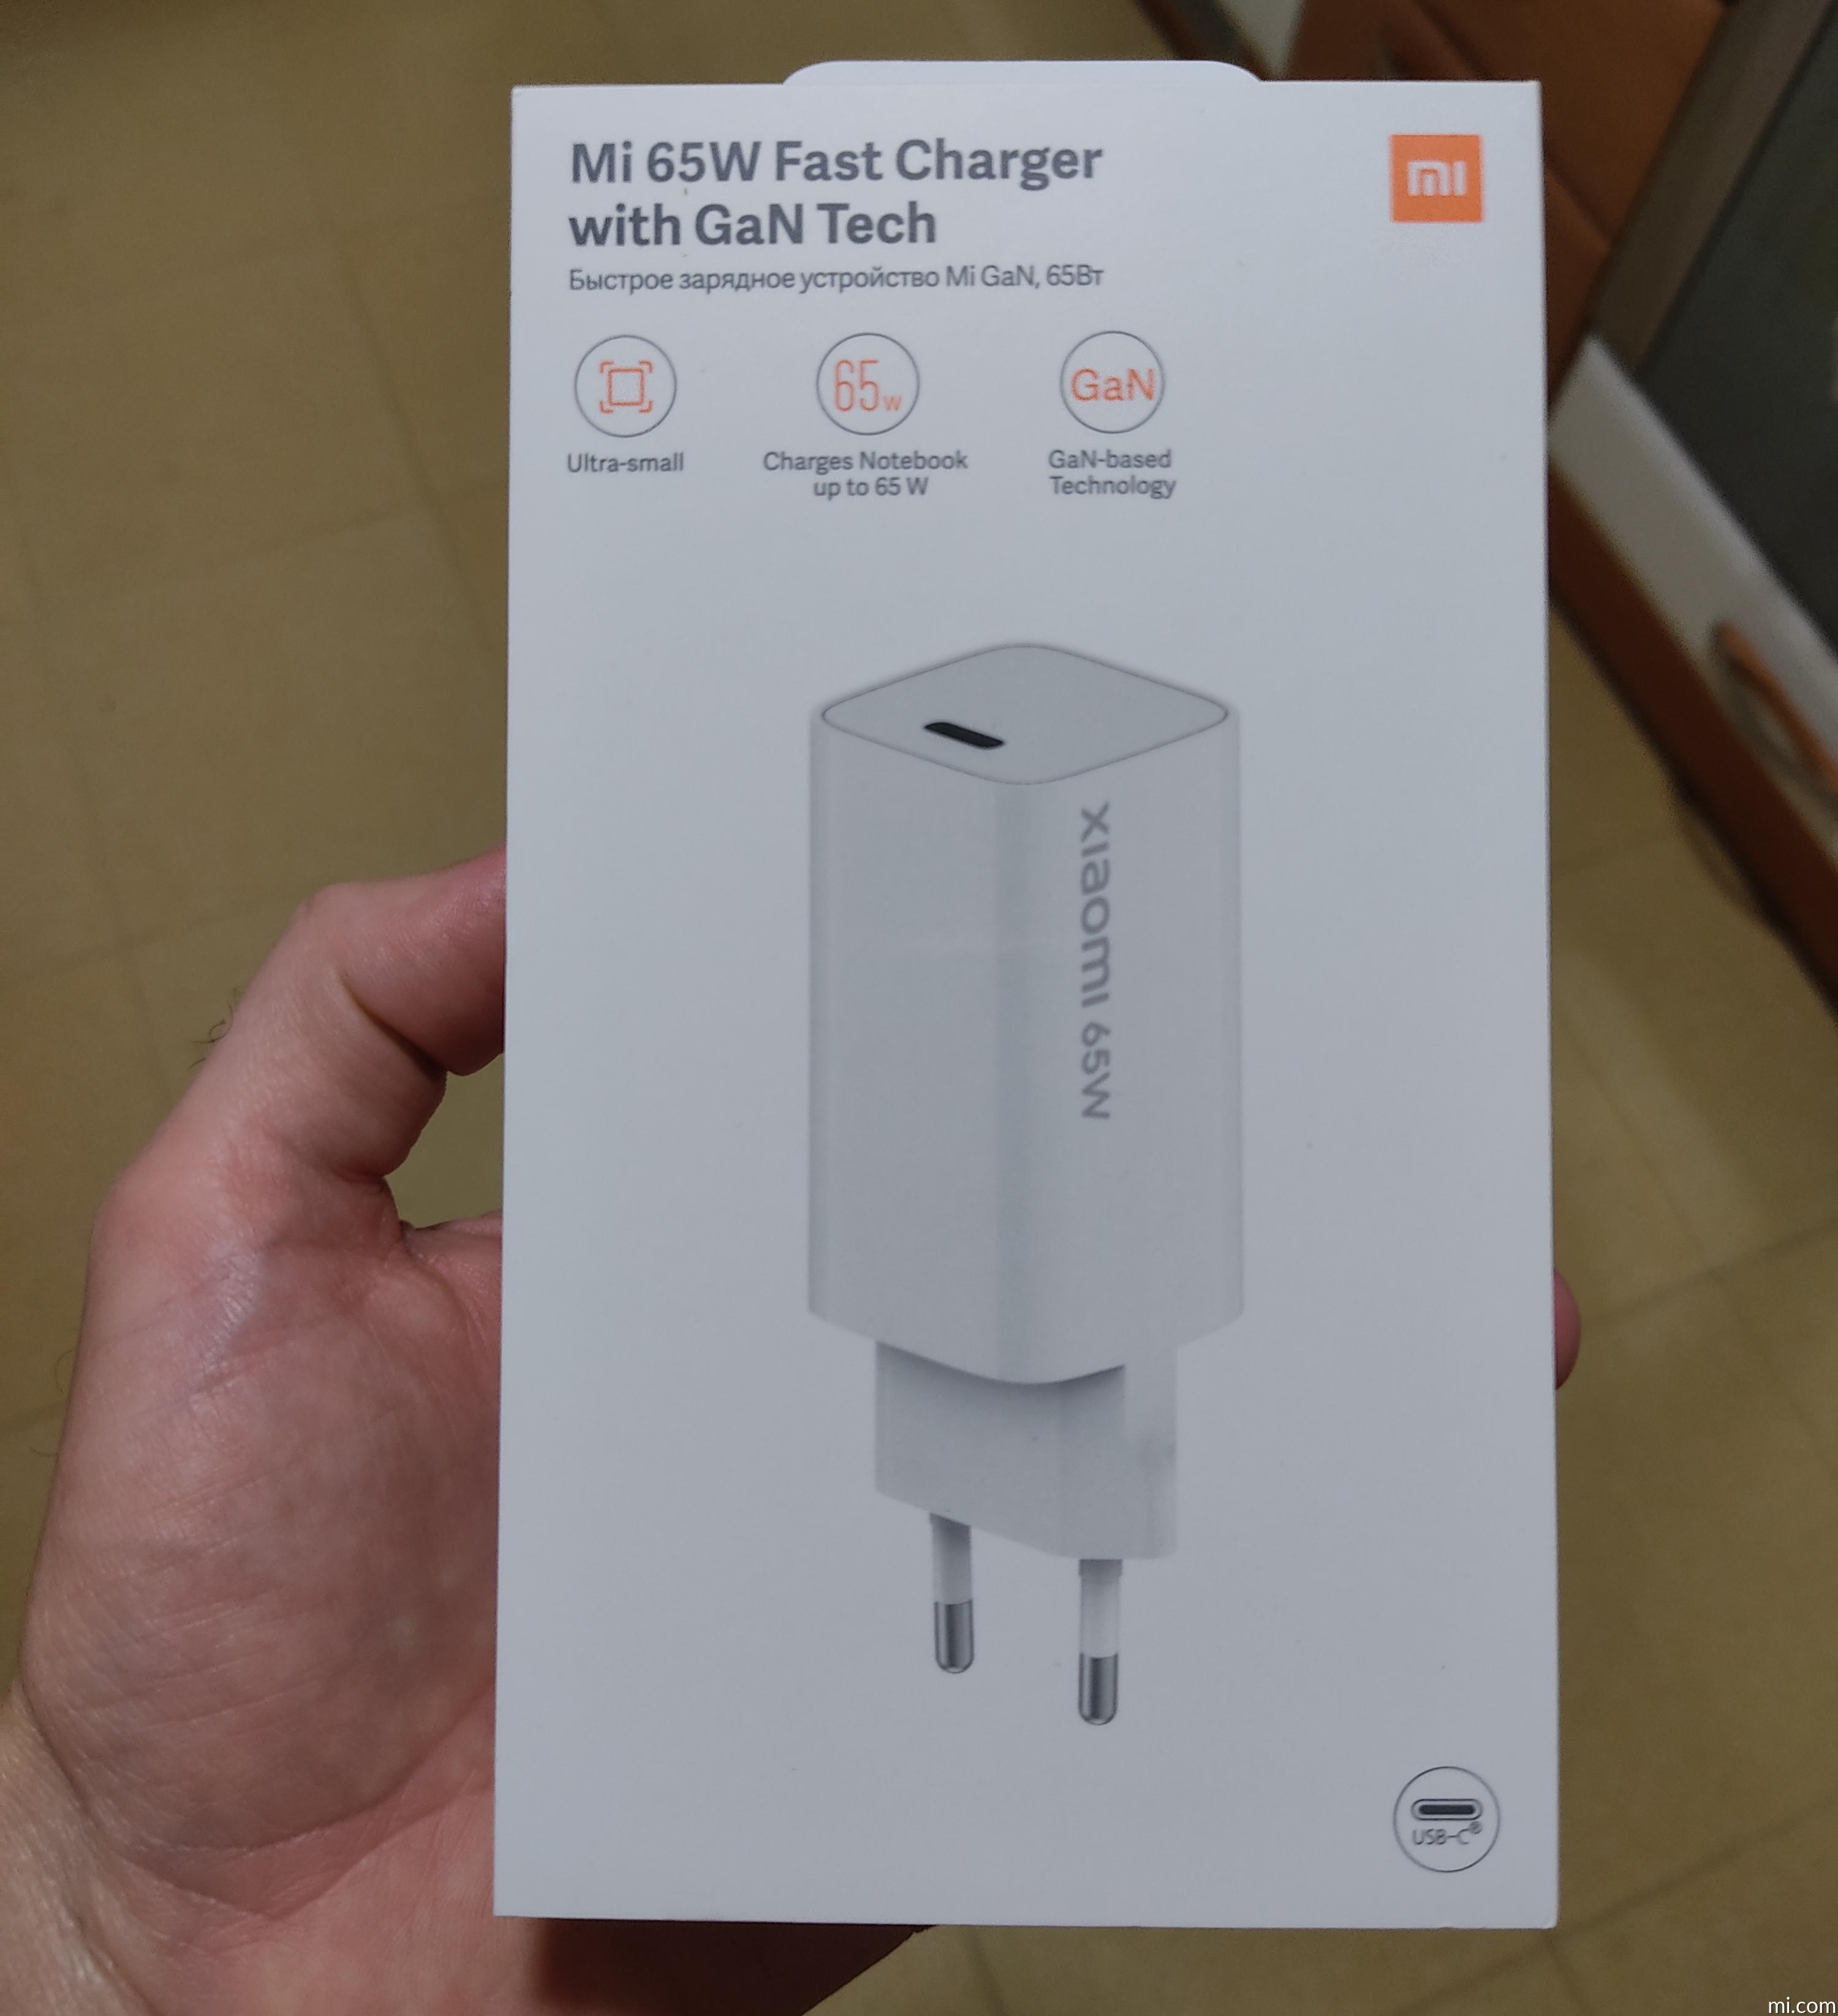 Mi 65W Fast Charger with GaN Tech